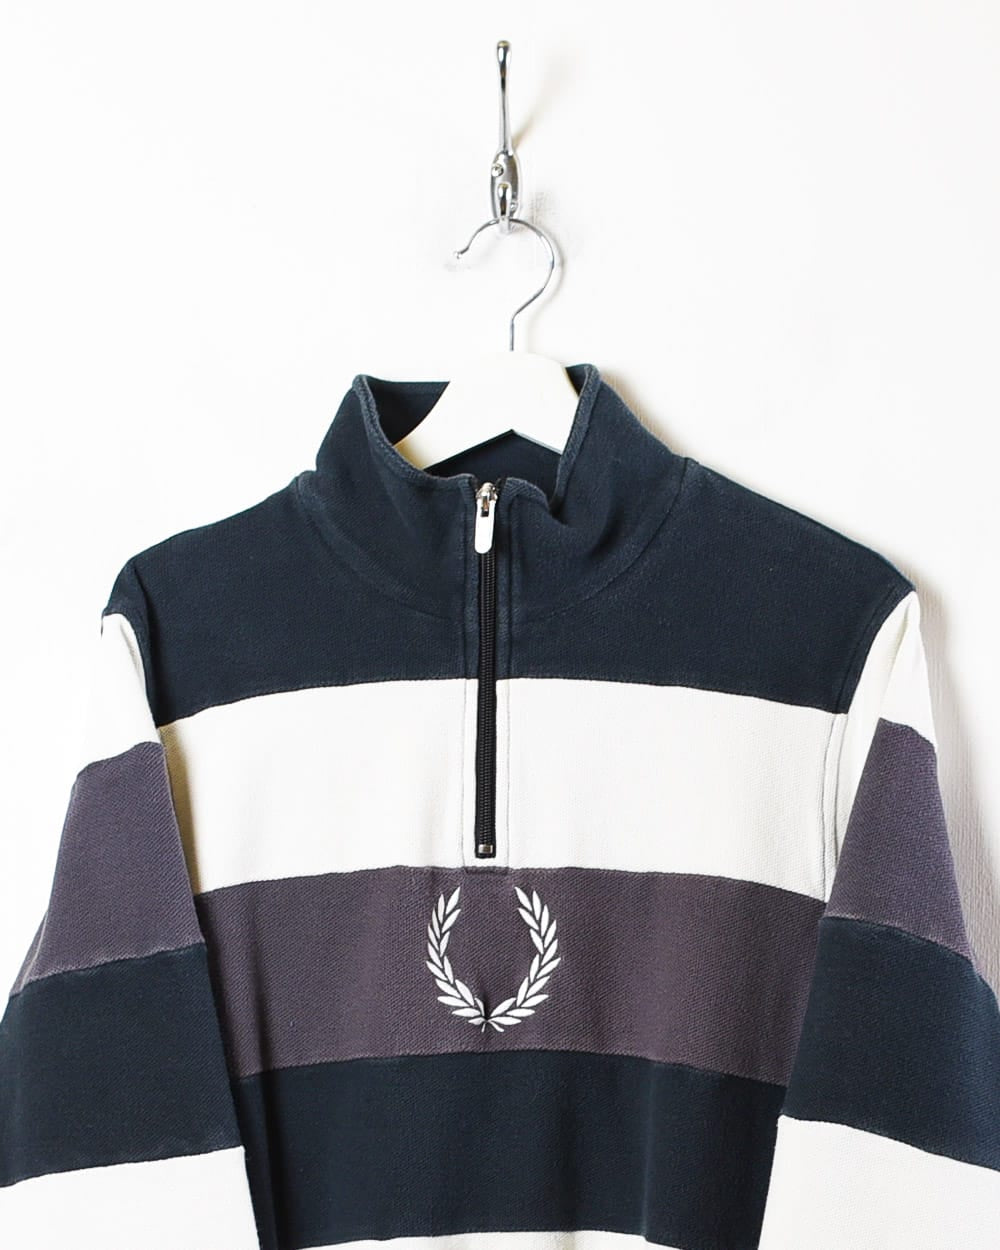 Black Fred Perry Striped 1/4 Zip Sweatshirt - Small